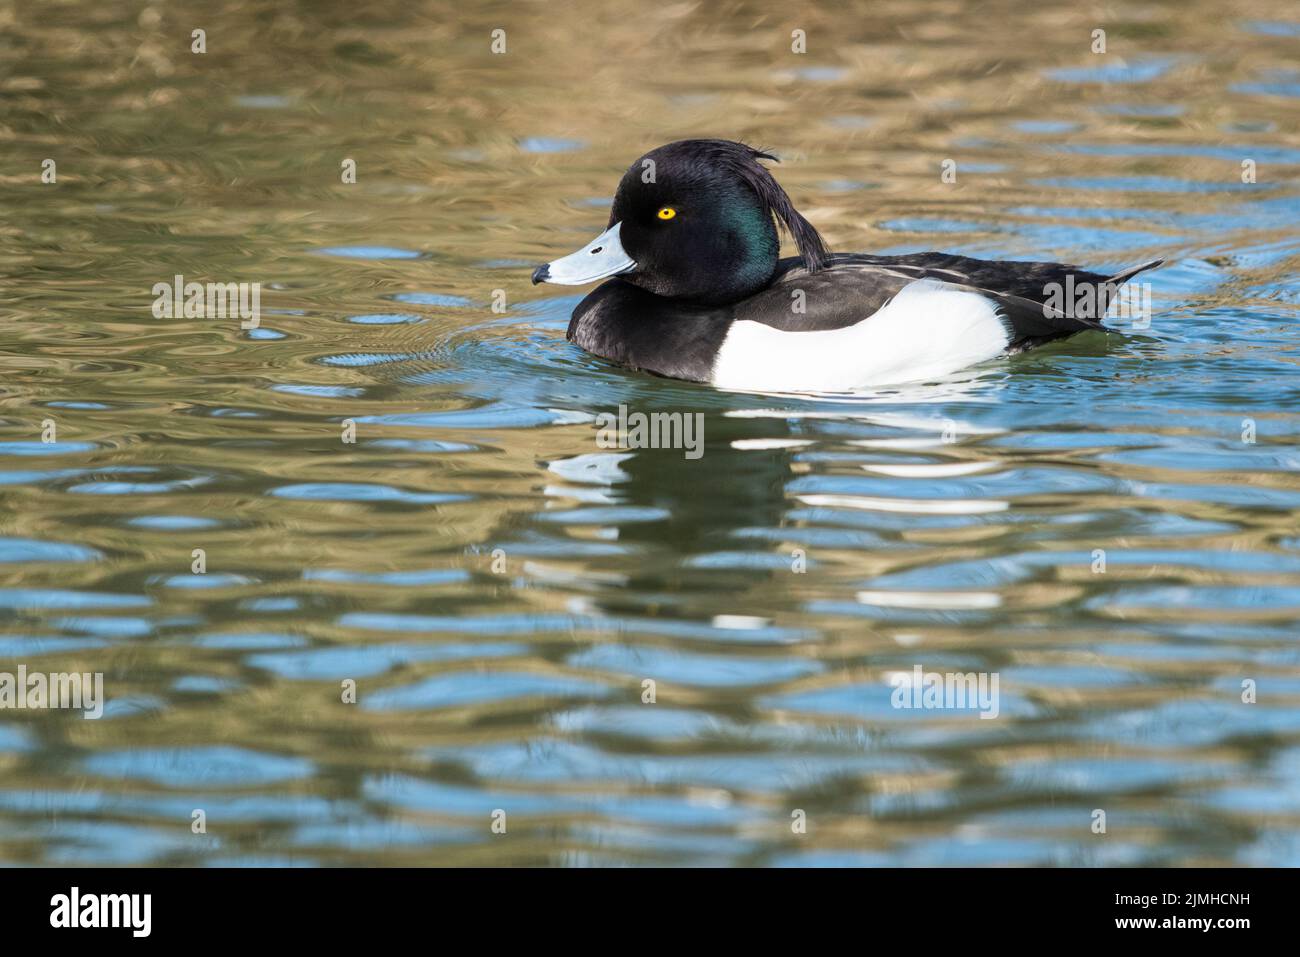 Male Tufted Duck swimming in the pond Stock Photo